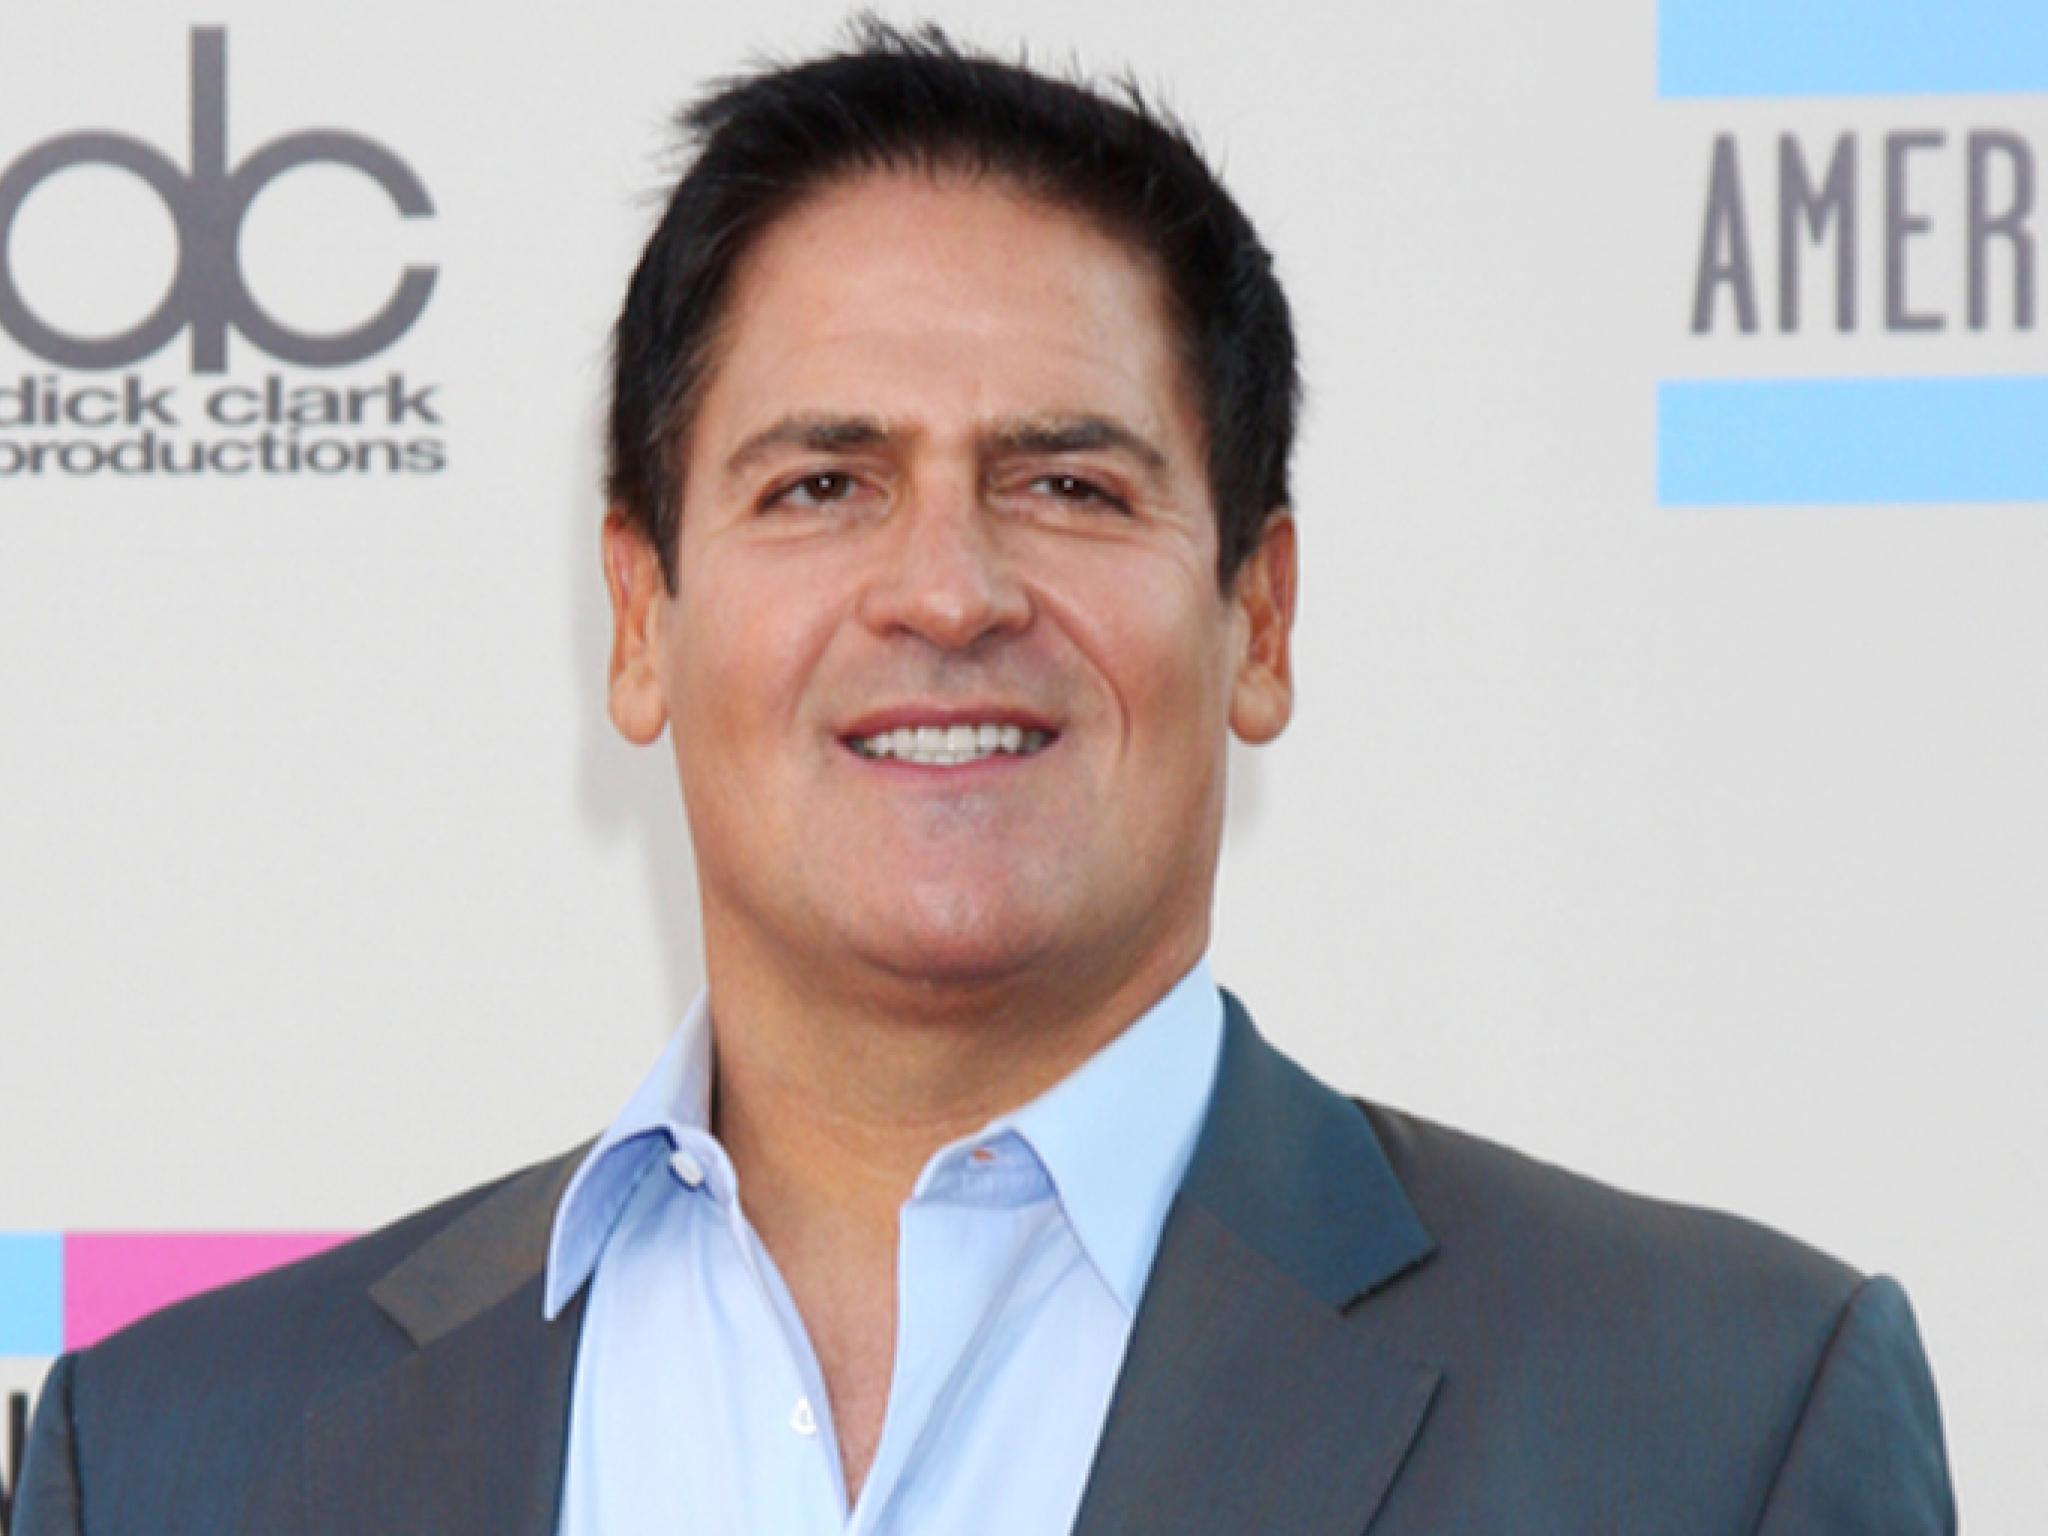  mark-cuban-benefits-from-surge-in-this-ethereum-based-ai-token--portfolio-climbs-180k-in-a-single-week 